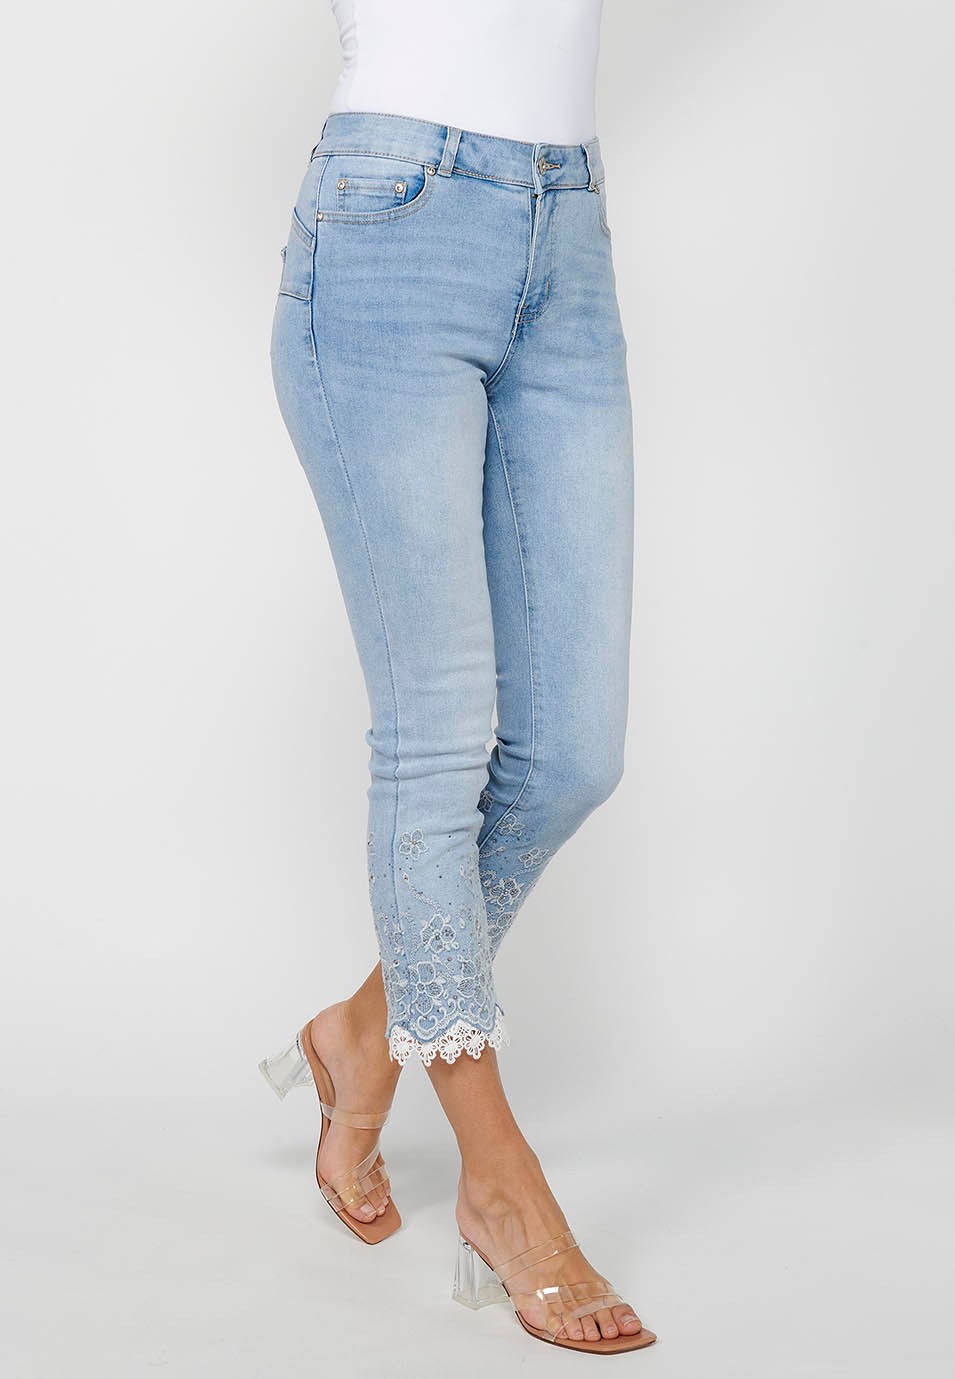 Long slim jeans pants with front zipper closure and light blue floral embroidered details for women 3